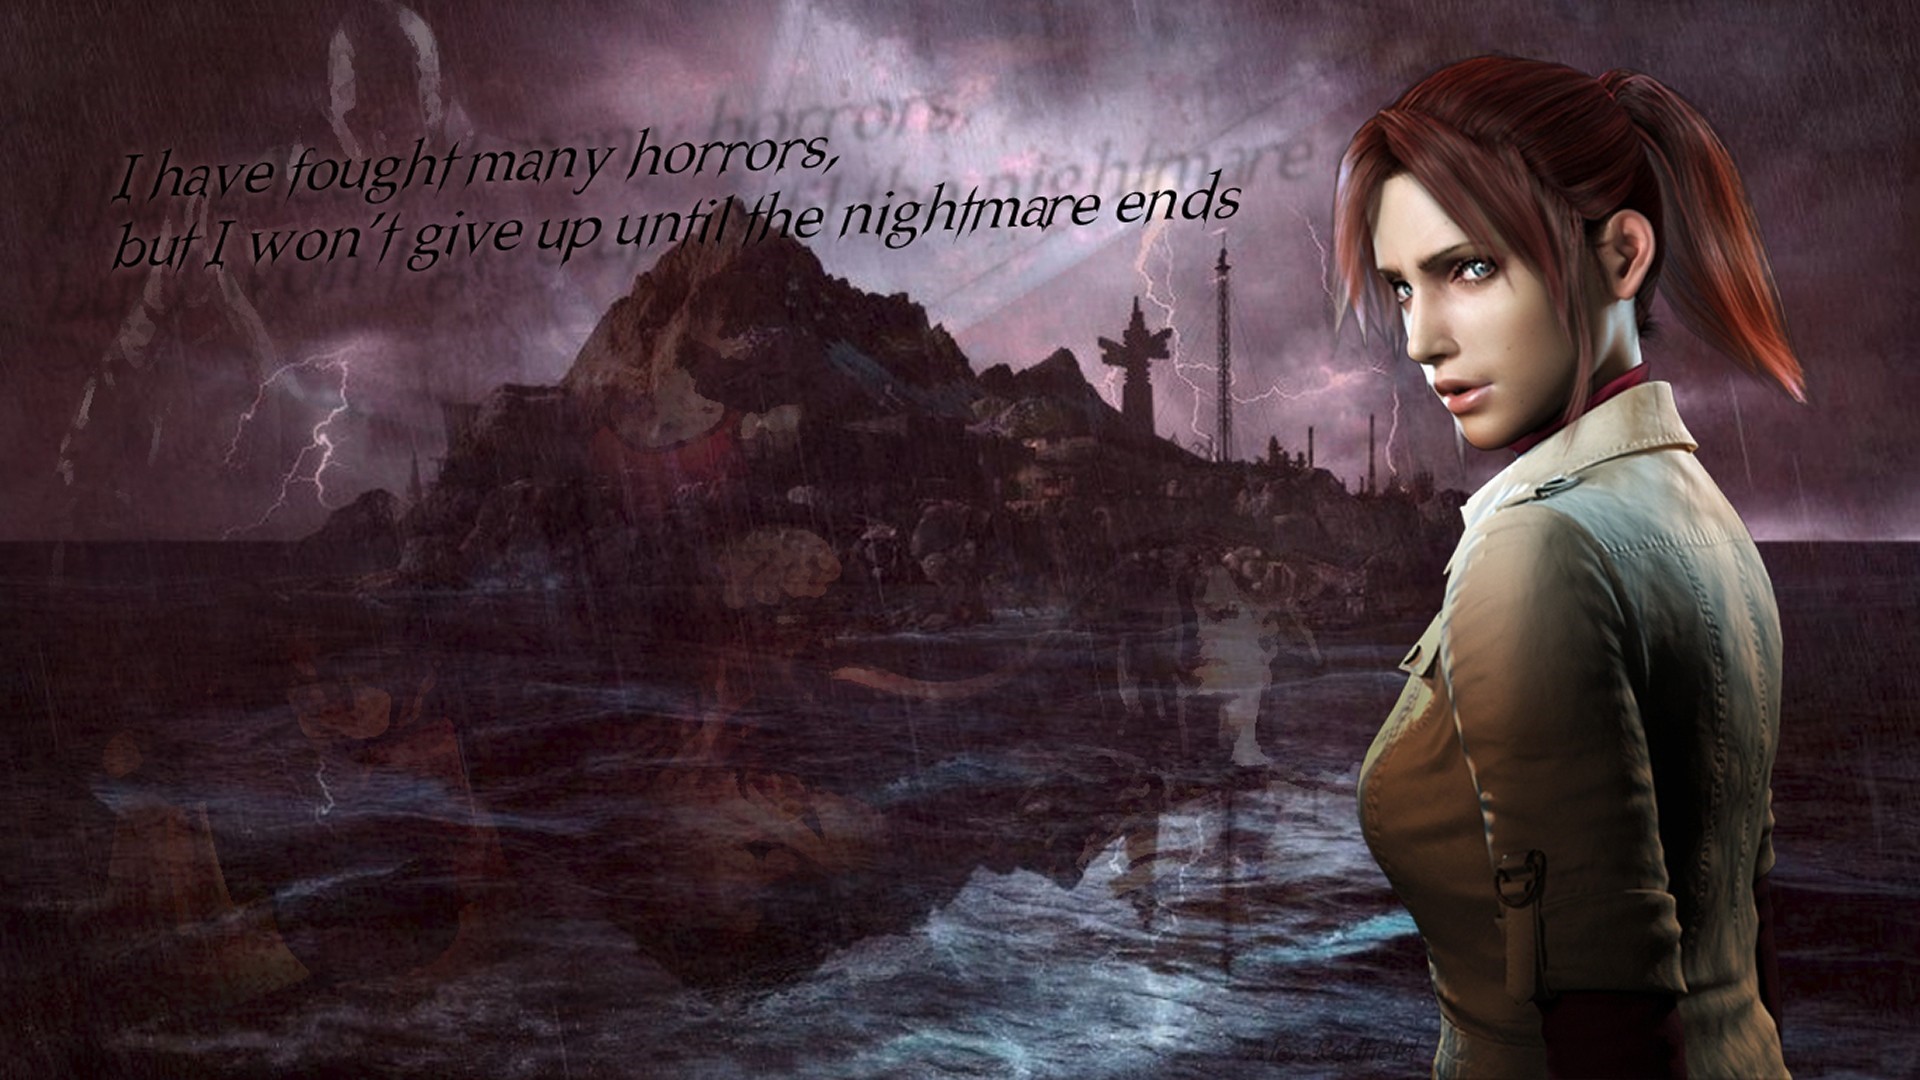 1920x1080 claire redfield resident evil resident evil 2 capcom biohazard zombies video games quote wallpaper JPG 349 kB